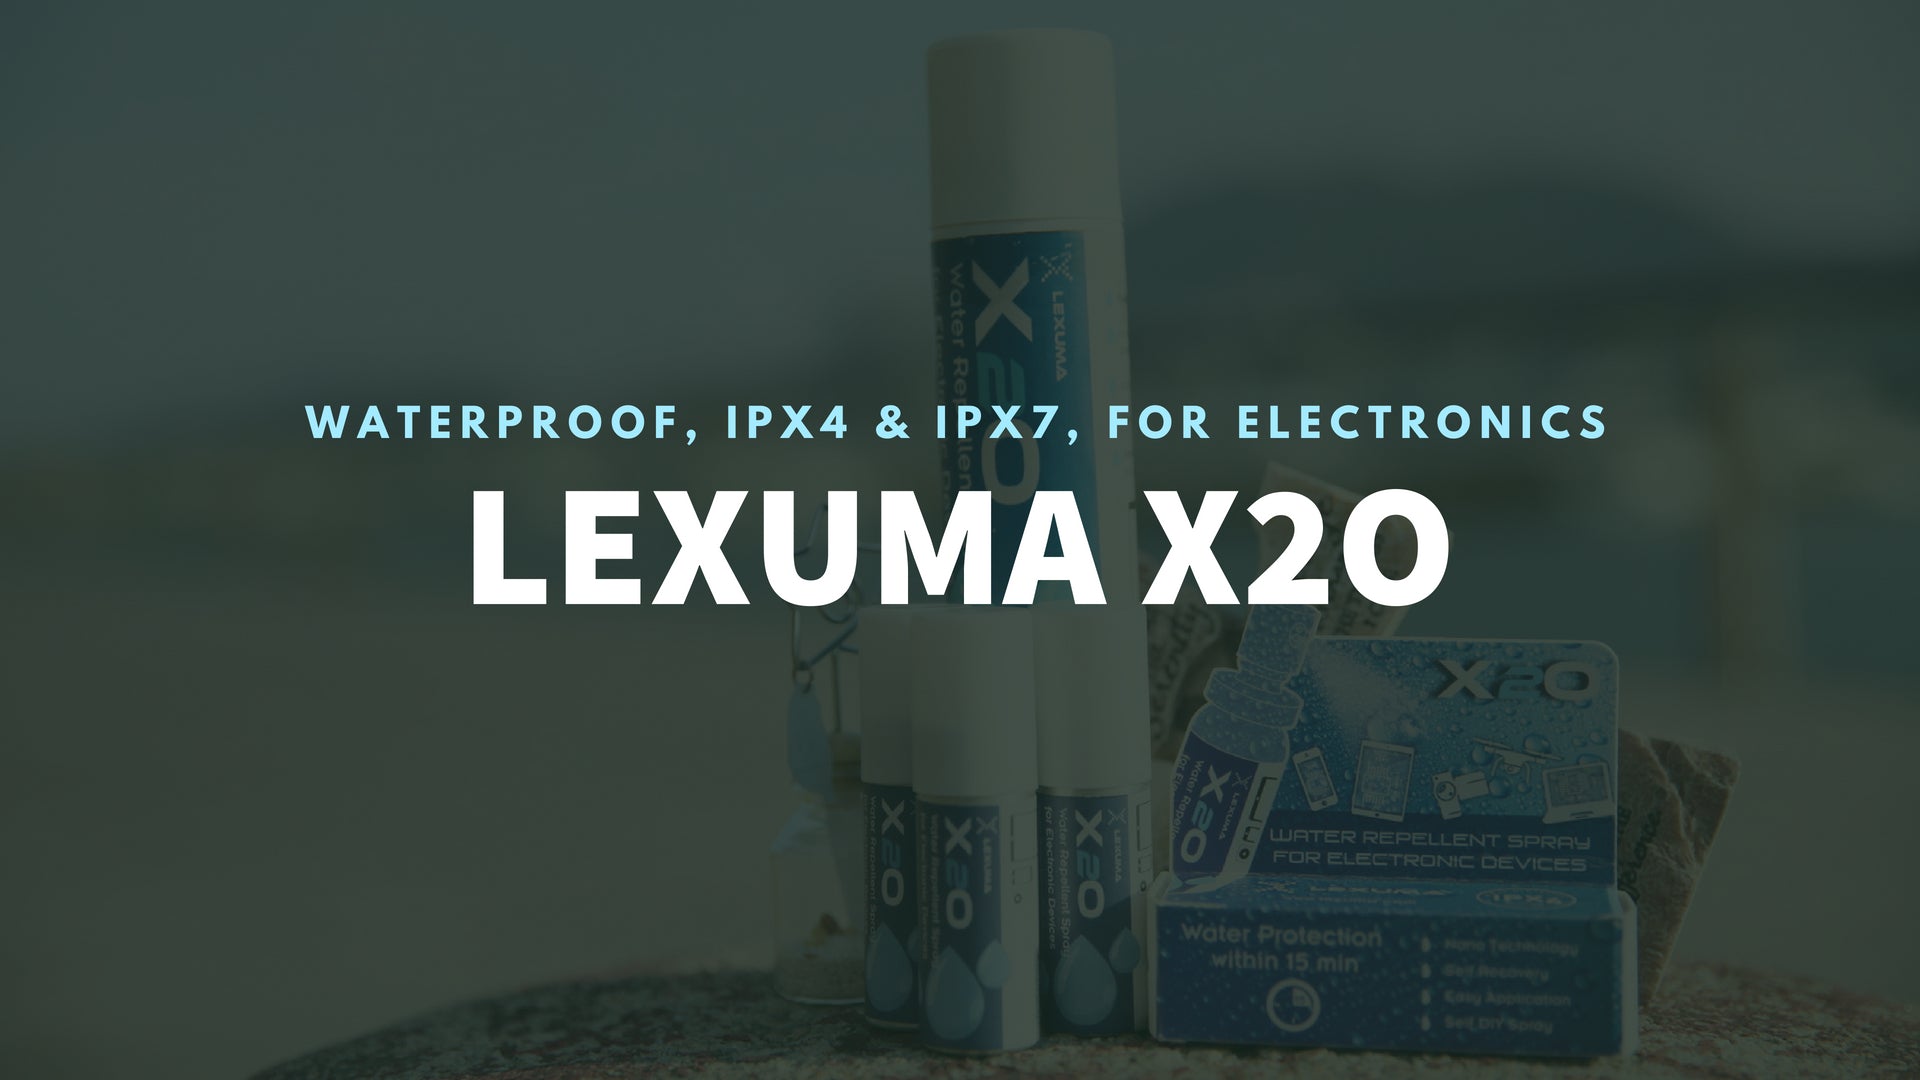 Lexuma 辣數碼防水噴霧 XWP-1100 X2O Water Repellent Spray with IPX4 and IPX7 water protection conformal protective coating electronics pcb waterproofing circuit board sealer gel conformal clear coat for electronics moisture proof pcb waterproof nano spray for electronics devices mobile phone epoxy conformal coating sealant spray moisture proof Machinery Protection banner